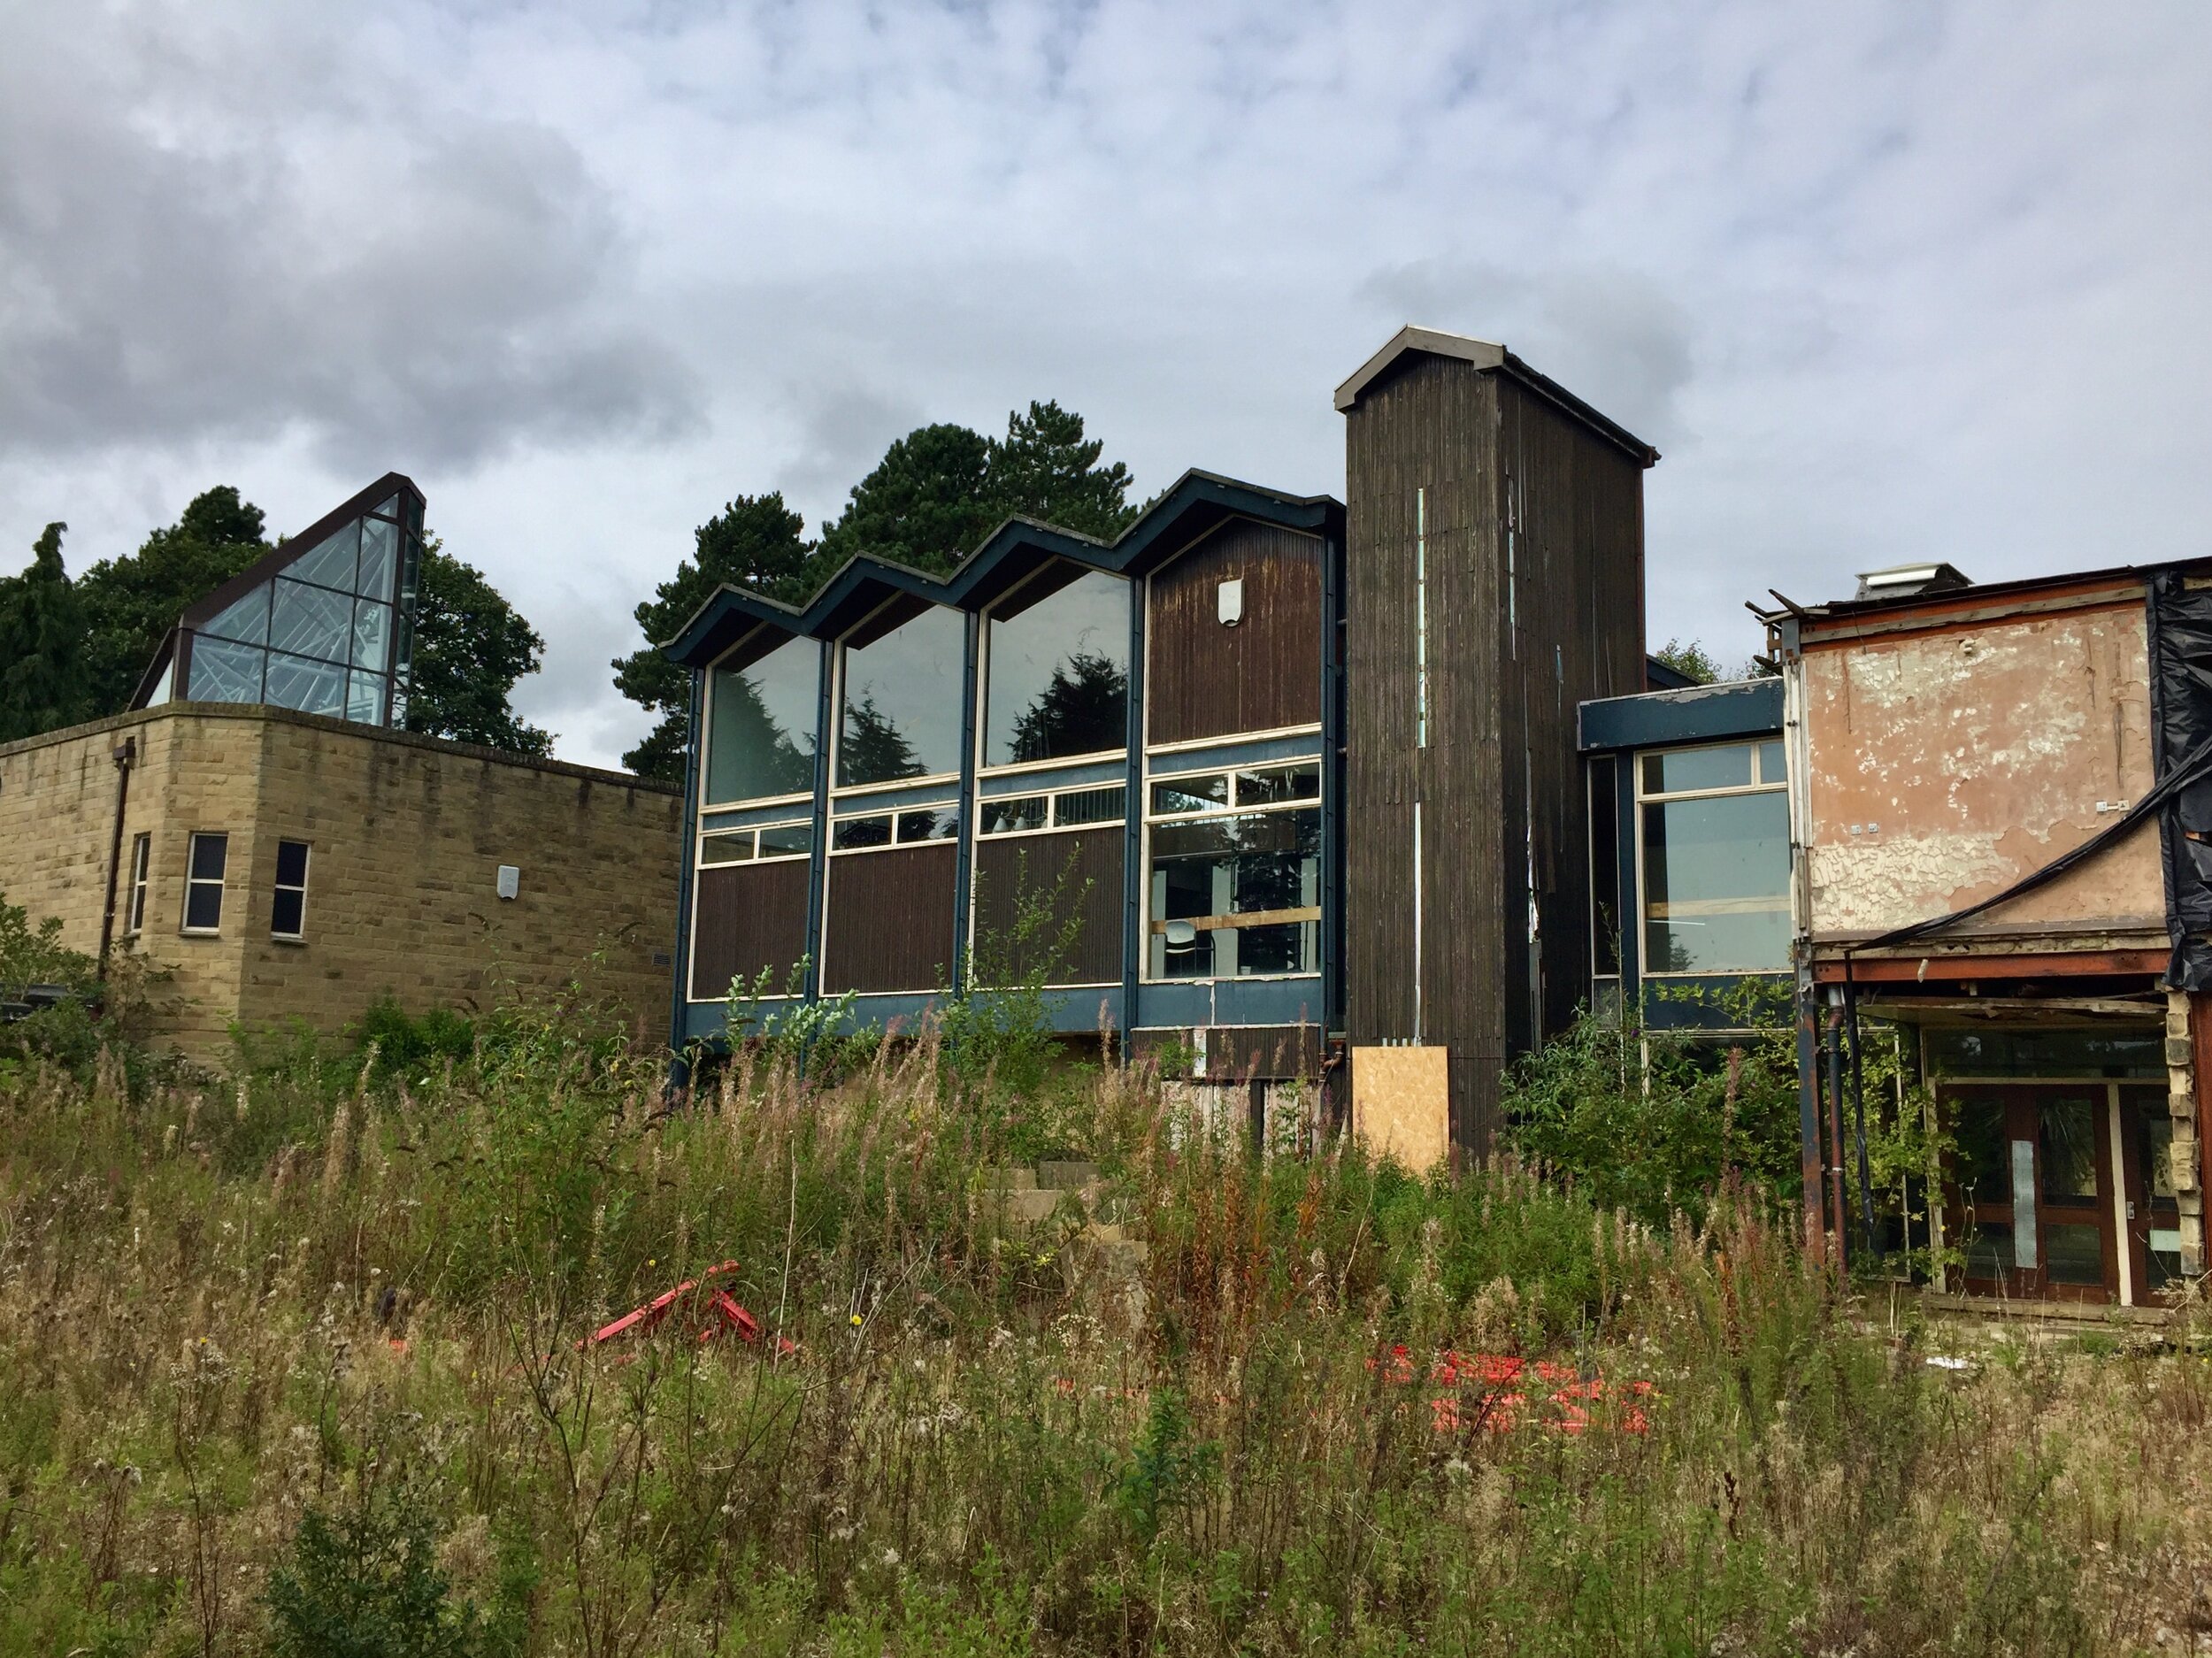  The back of the library. On the left is the purpose-built Lawrence Batley Centre that houses the National Arts Education Archive, which is still in use. The NAEA began life in 1985 in the attic of the mansion.  